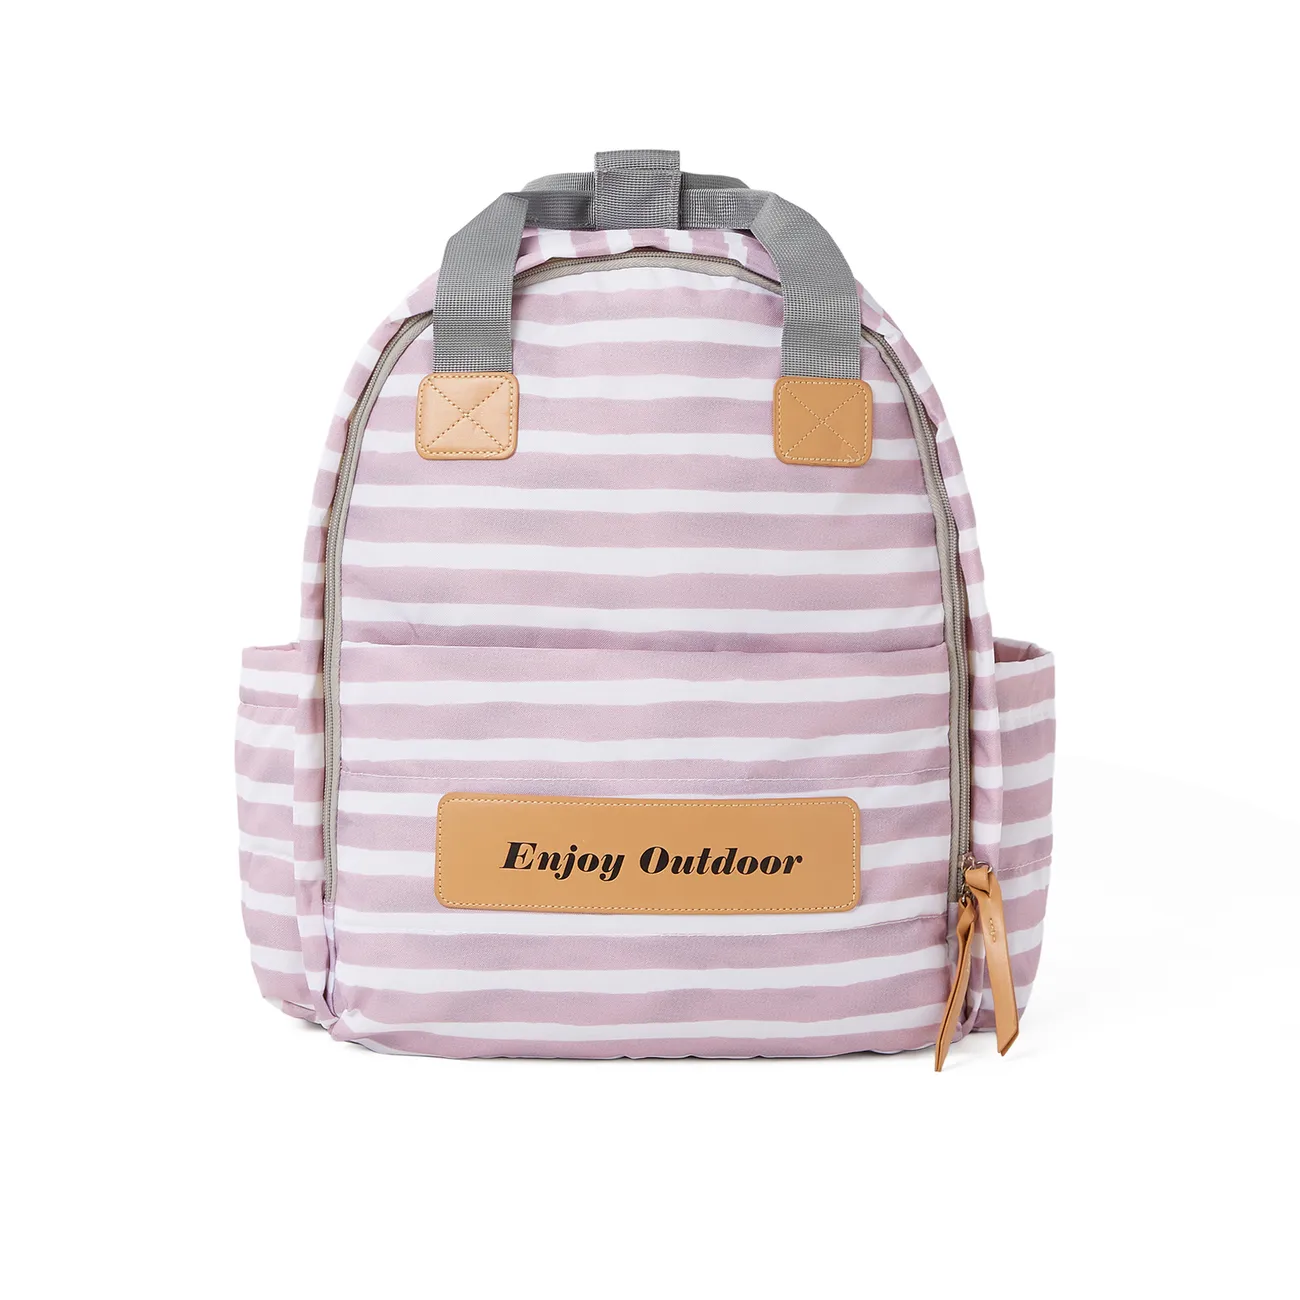 Multi-functional and Waterproof Mommy Backpack with Large Capacity for Diapering Essentials and Leisure Pink big image 1